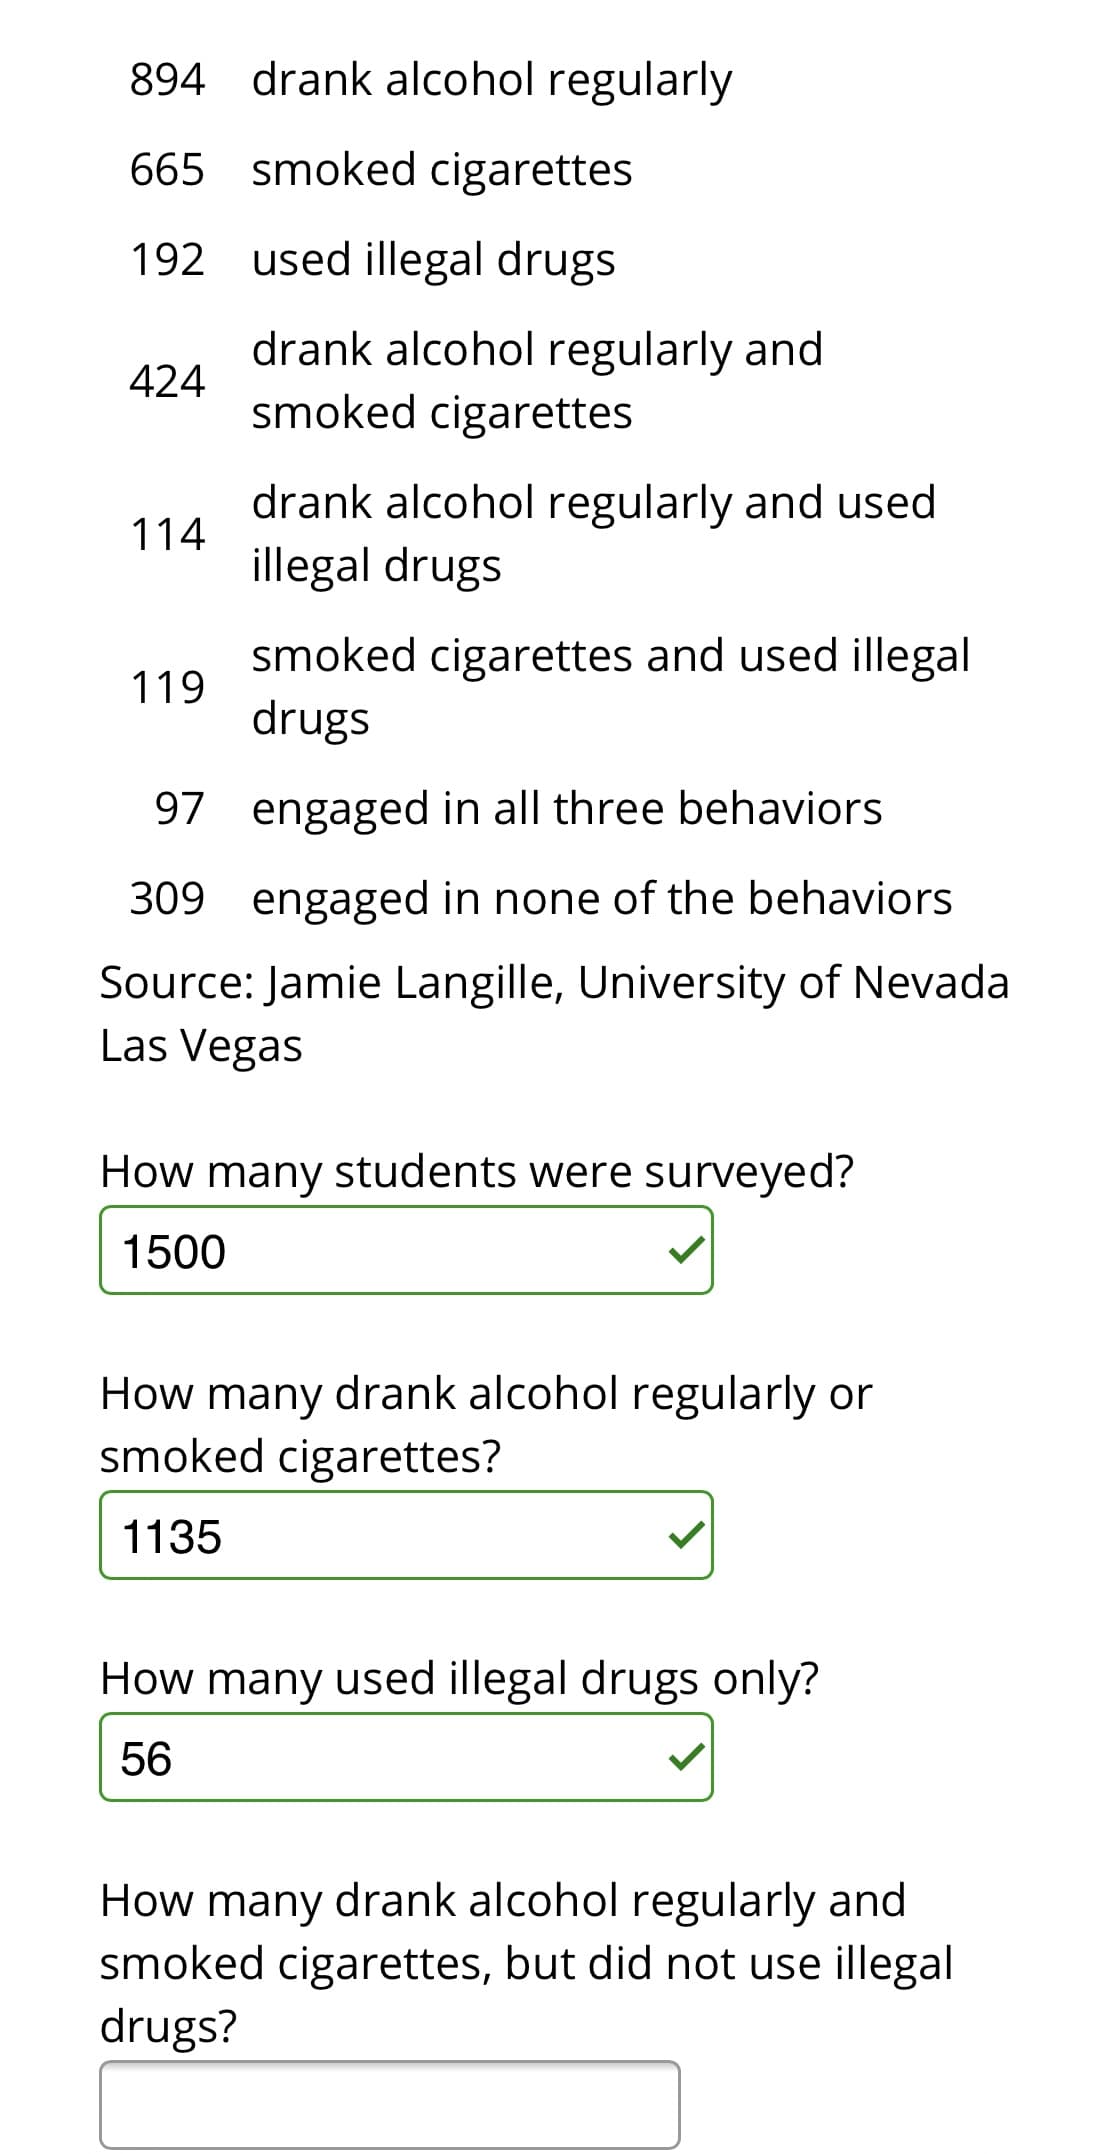 894 drank alcohol regularly
665 smoked cigarettes
192 used illegal drugs
drank alcohol regularly and
smoked cigarettes
424
drank alcohol regularly and used
illegal drugs
114
smoked cigarettes and used illegal
119
drugs
97 engaged in all three behaviors
309 engaged in none of the behaviors
Source: Jamie Langille, University of Nevada
Las Vegas
How many students were surveyed?
1500
How many drank alcohol regularly or
smoked cigarettes?
1135
How many used illegal drugs only?
56
How many drank alcohol regularly and
smoked cigarettes, but did not use illegal
drugs?
